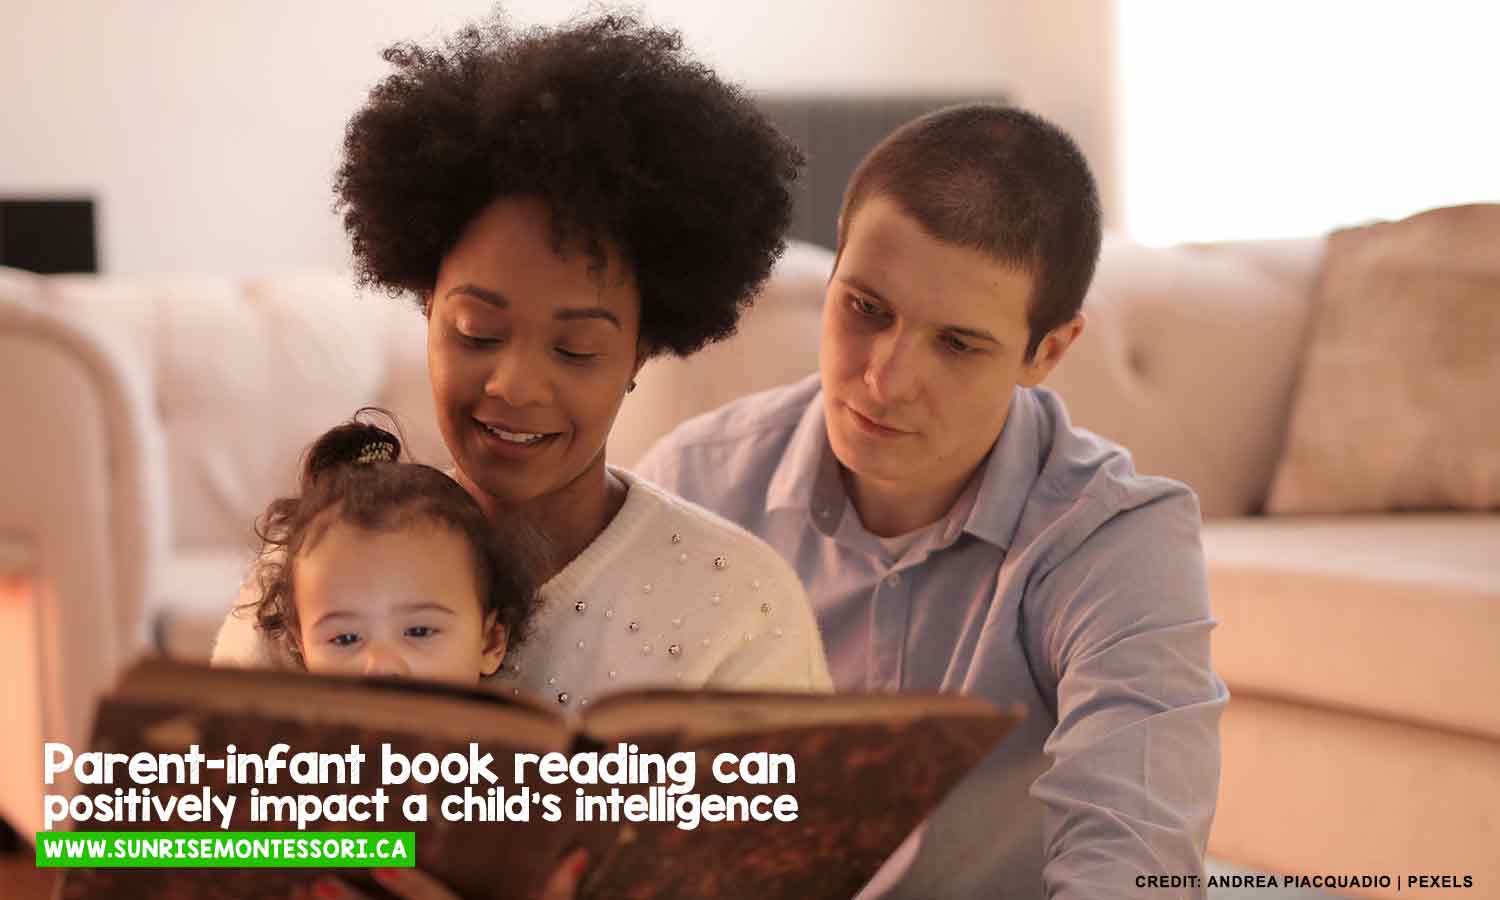 Parent-infant book reading can positively impact a child’s intelligence